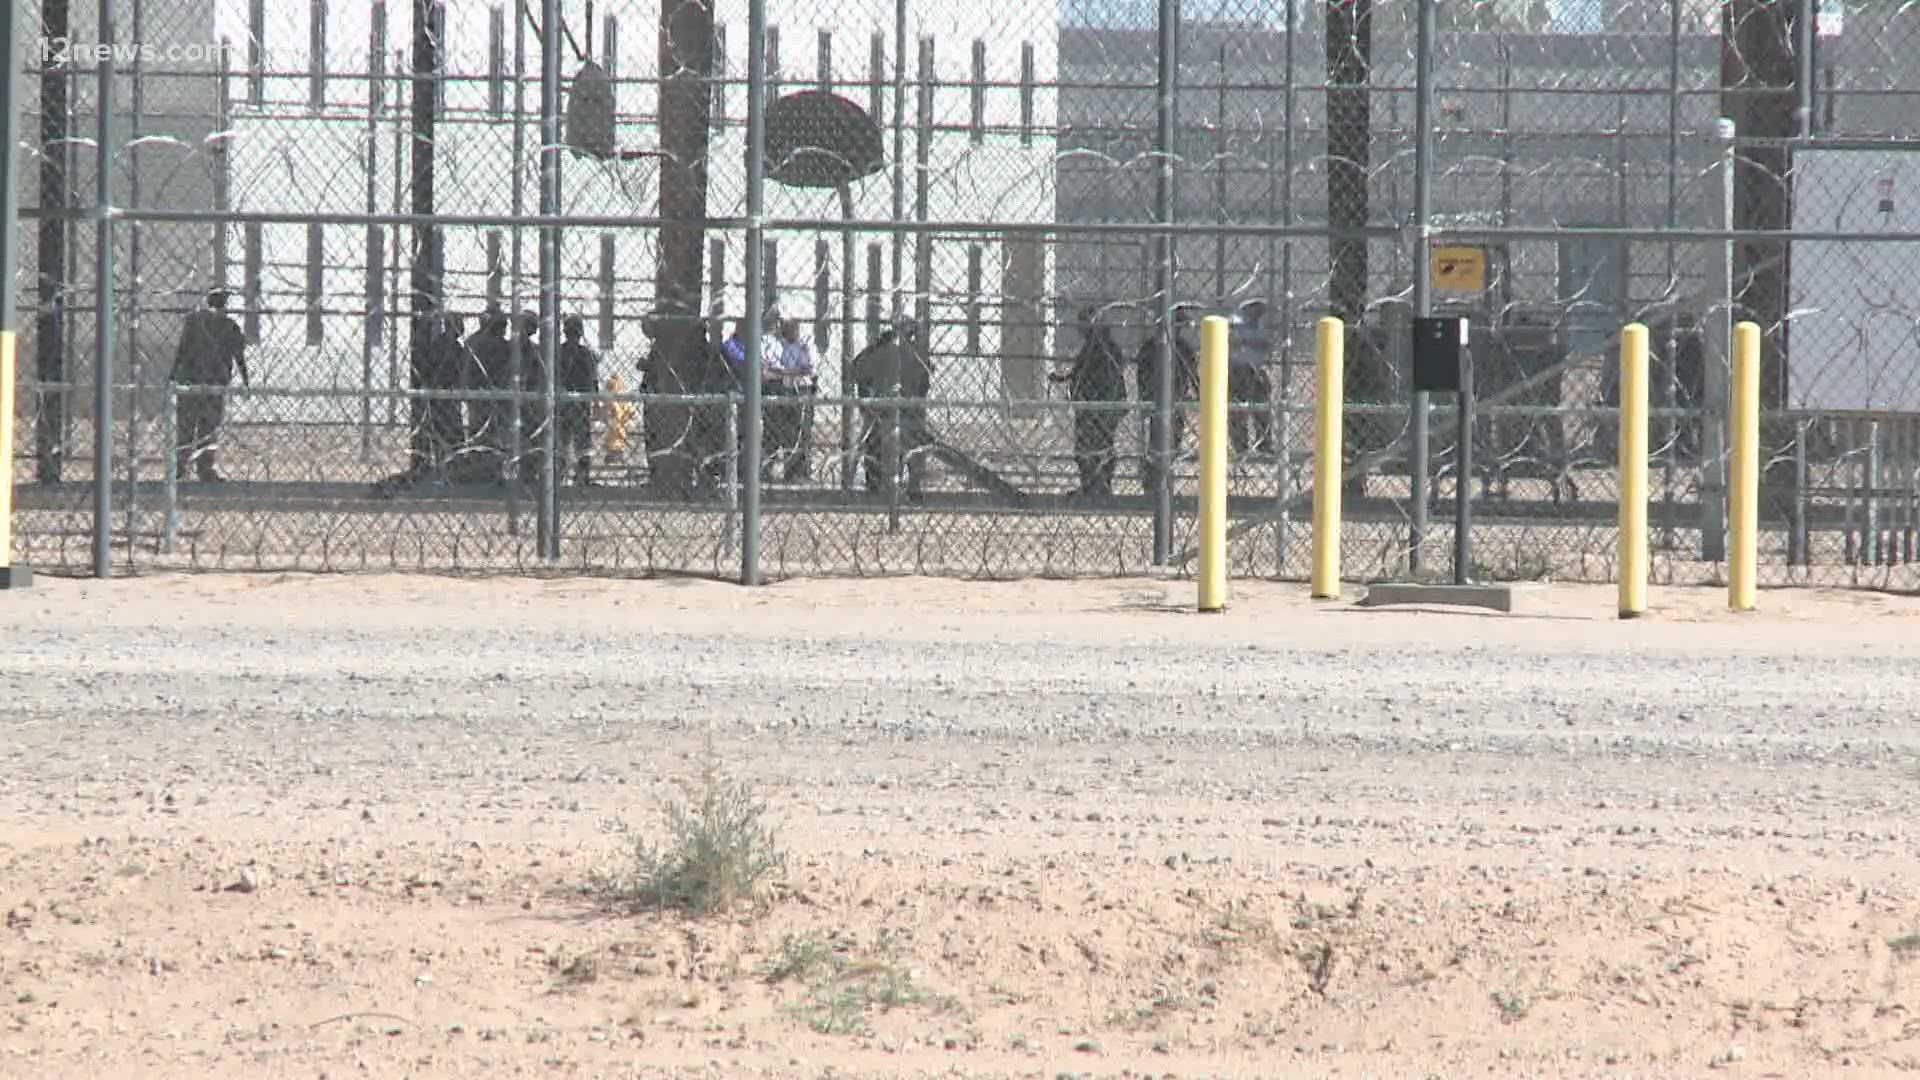 A new report shows nearly half the employees at an Arizona ICE detention center have tested positive for COVID-19.